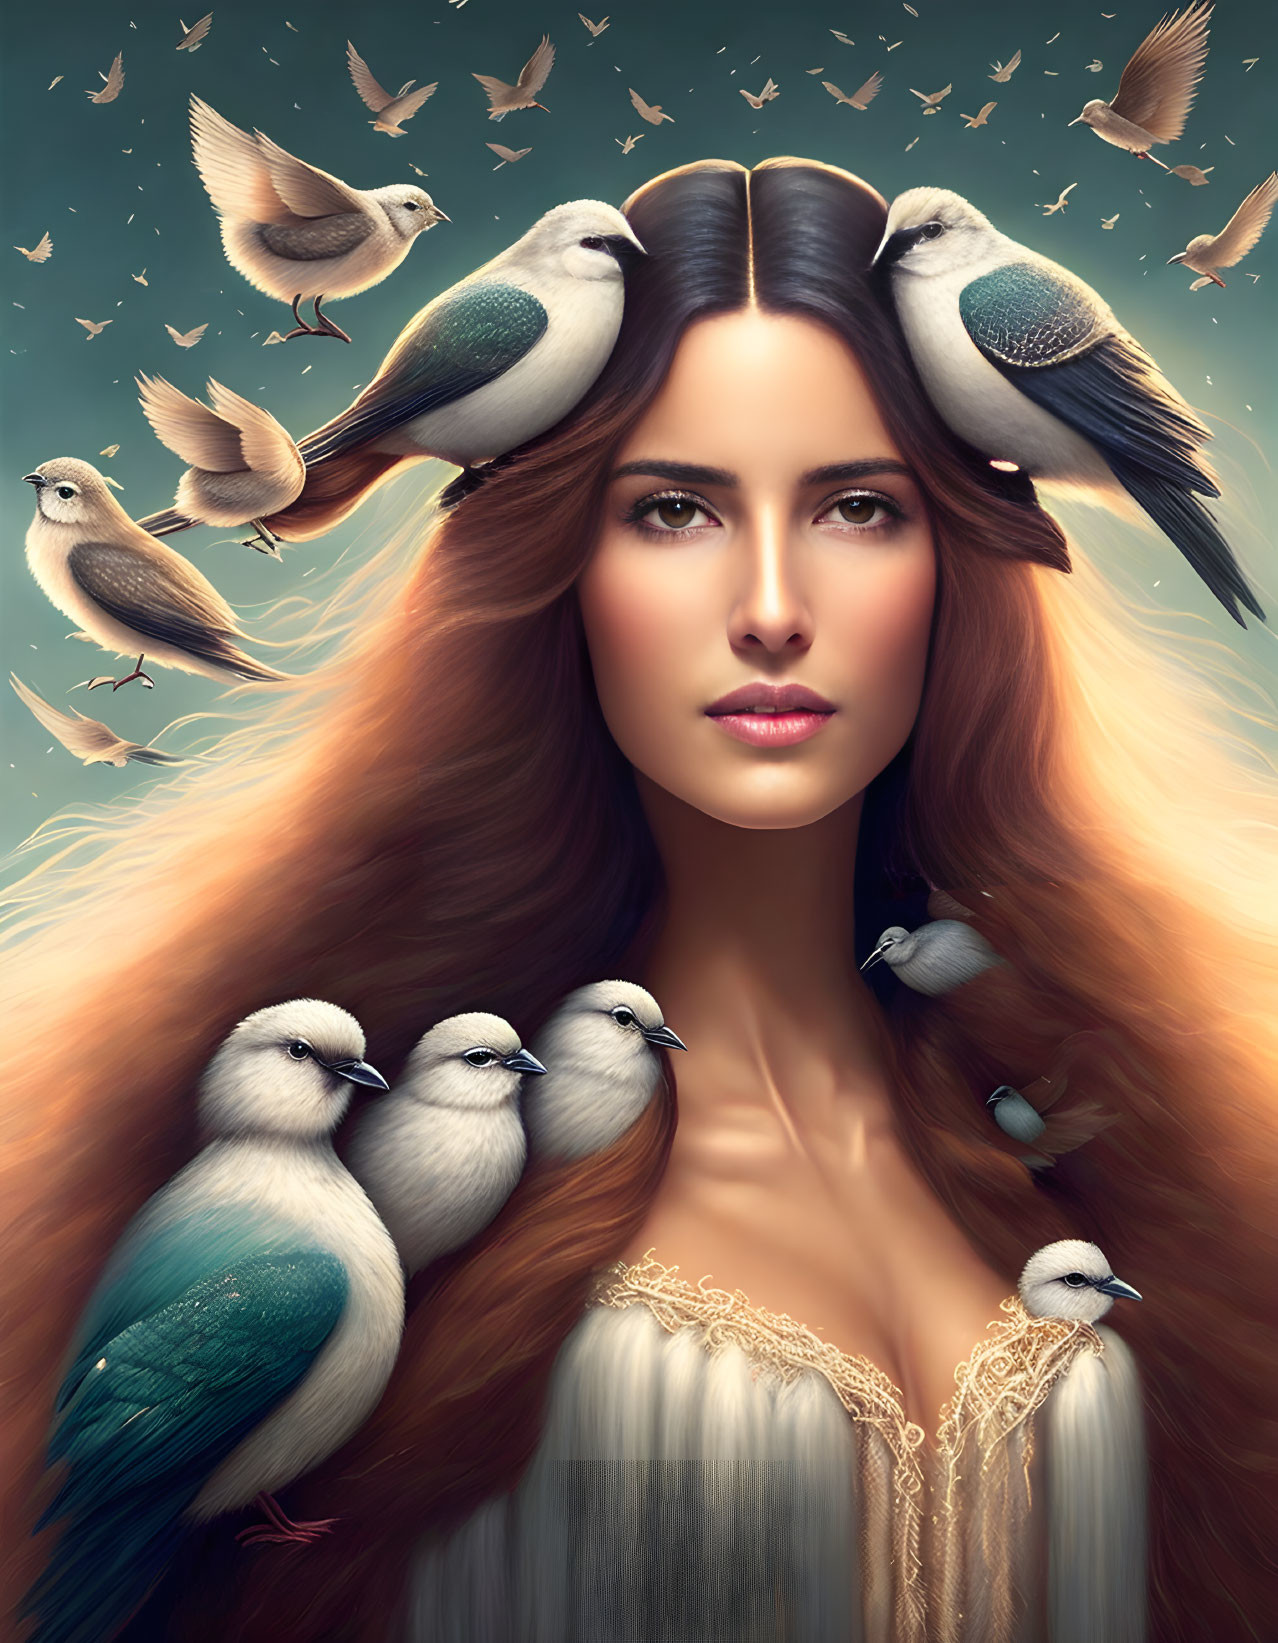 Woman with Long Flowing Hair Surrounded by Birds on Teal Background